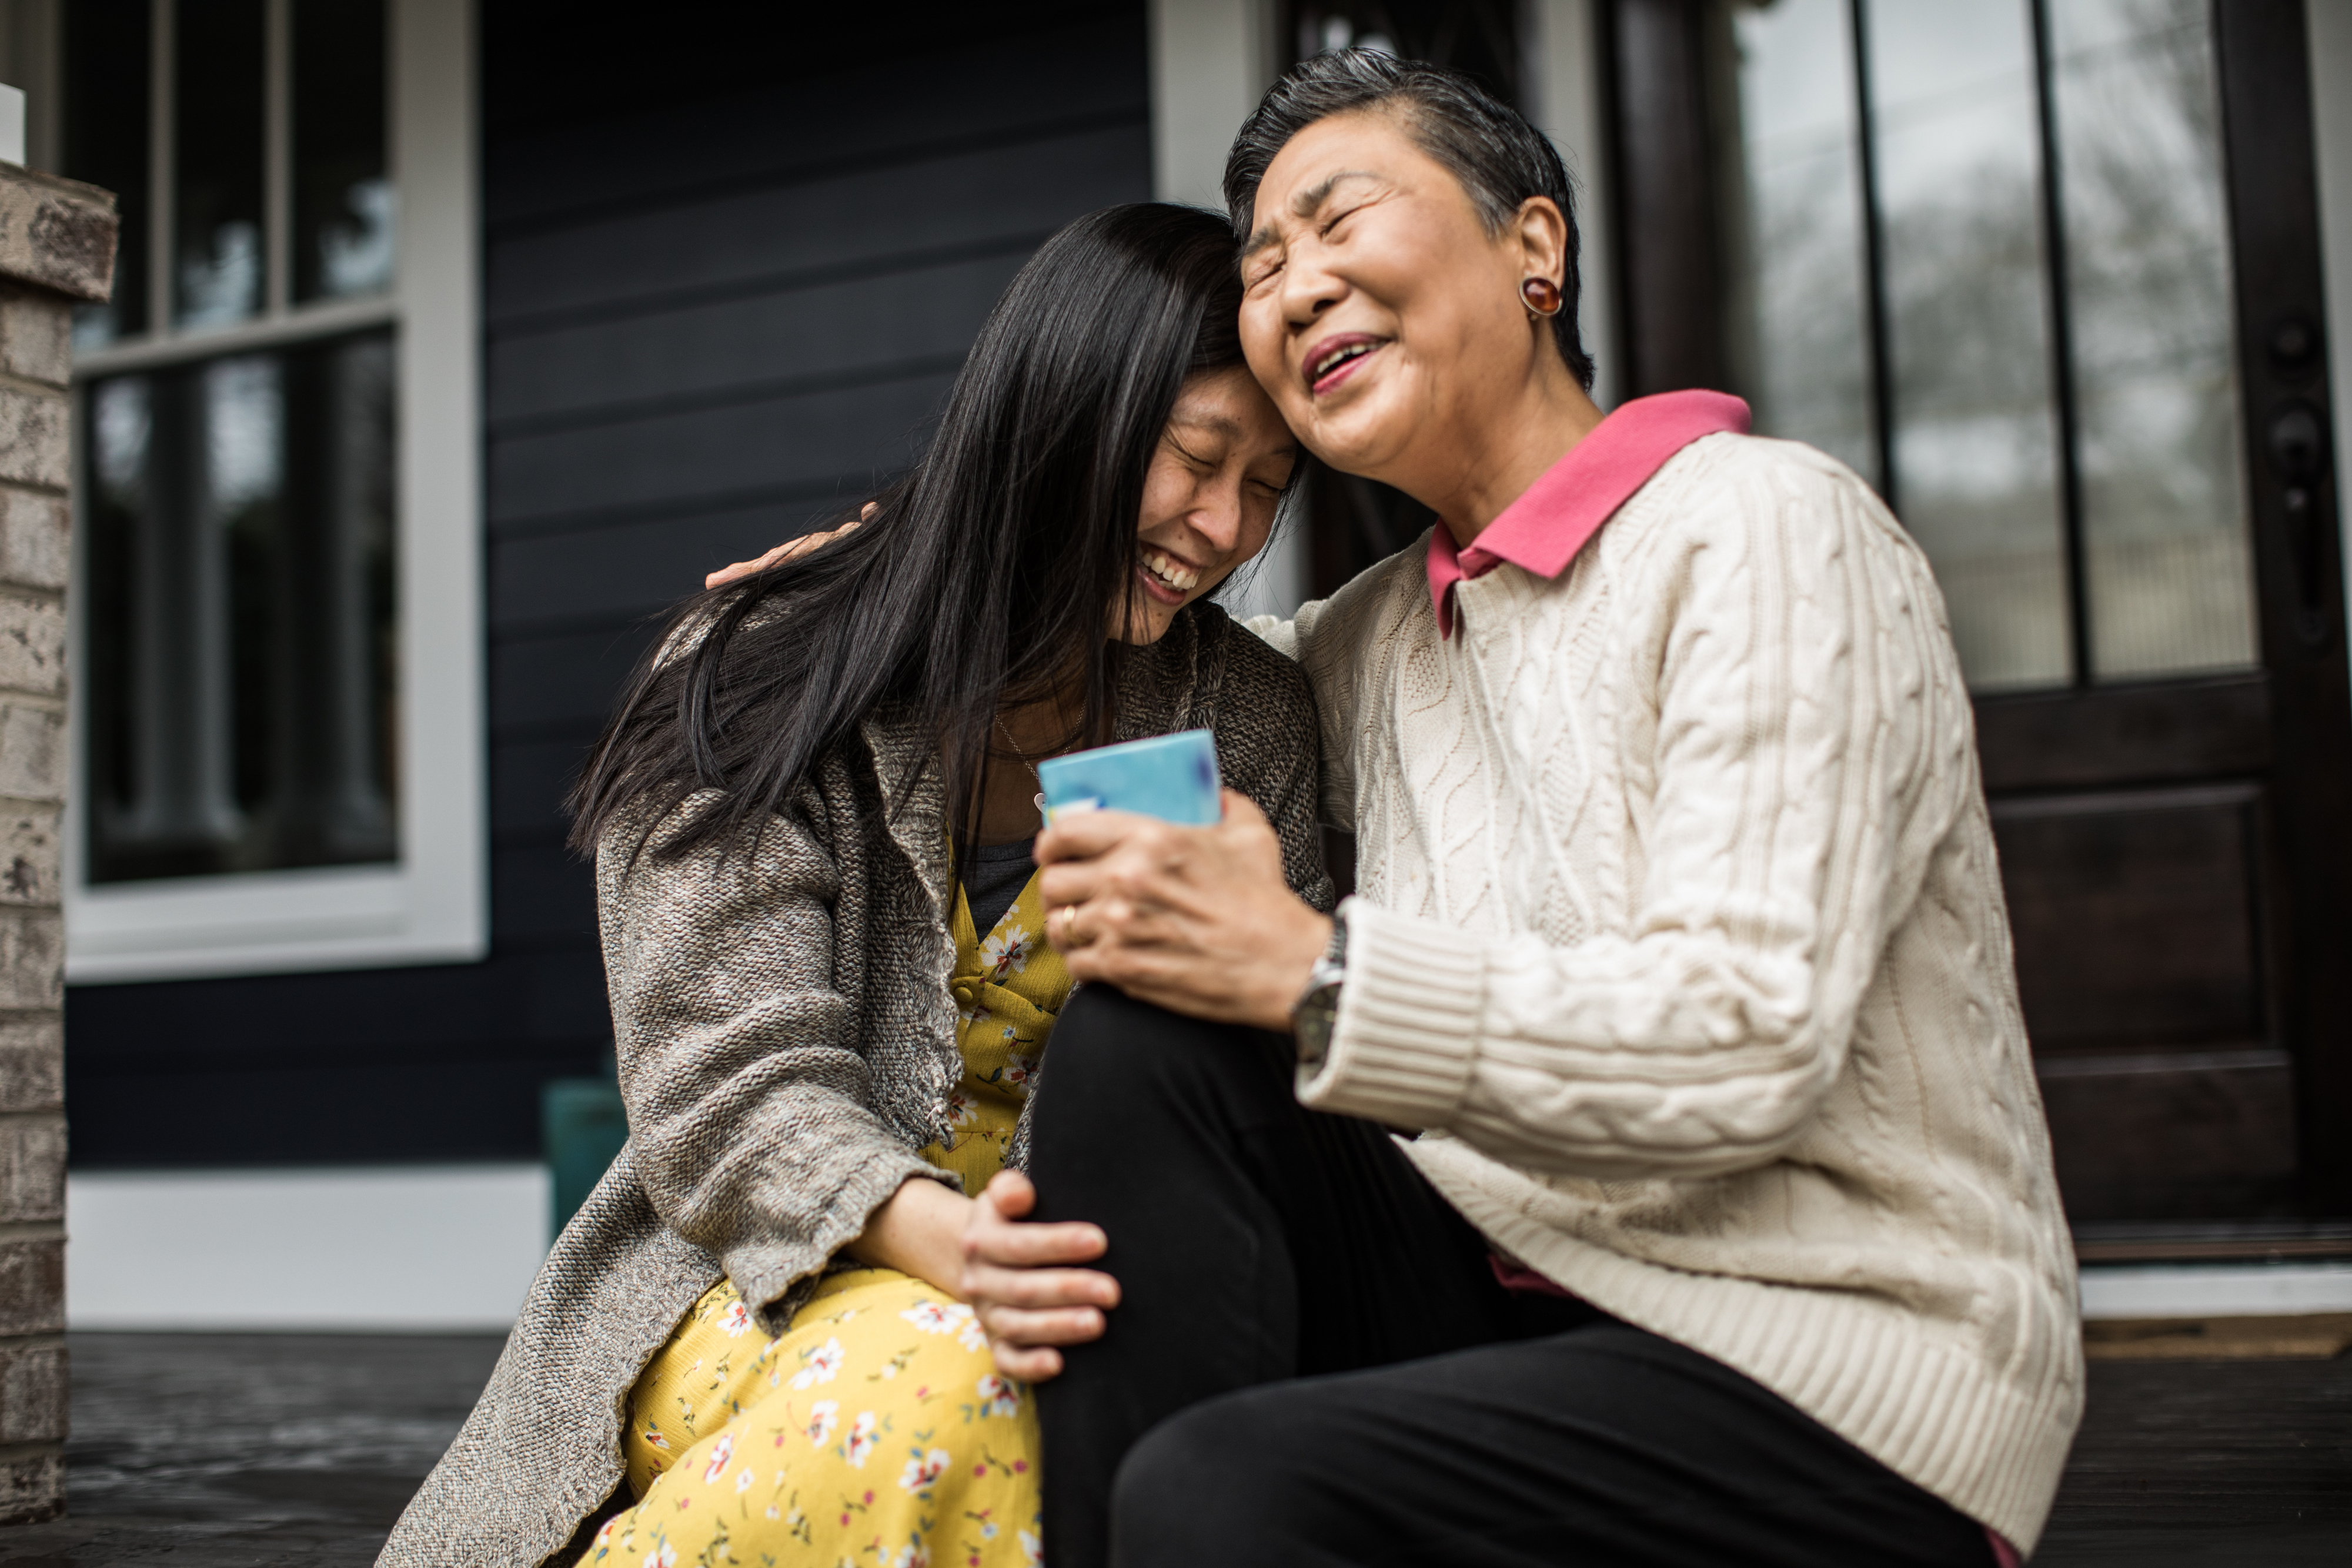 Two women embracing on a porch step, one consoling the other holding a phone